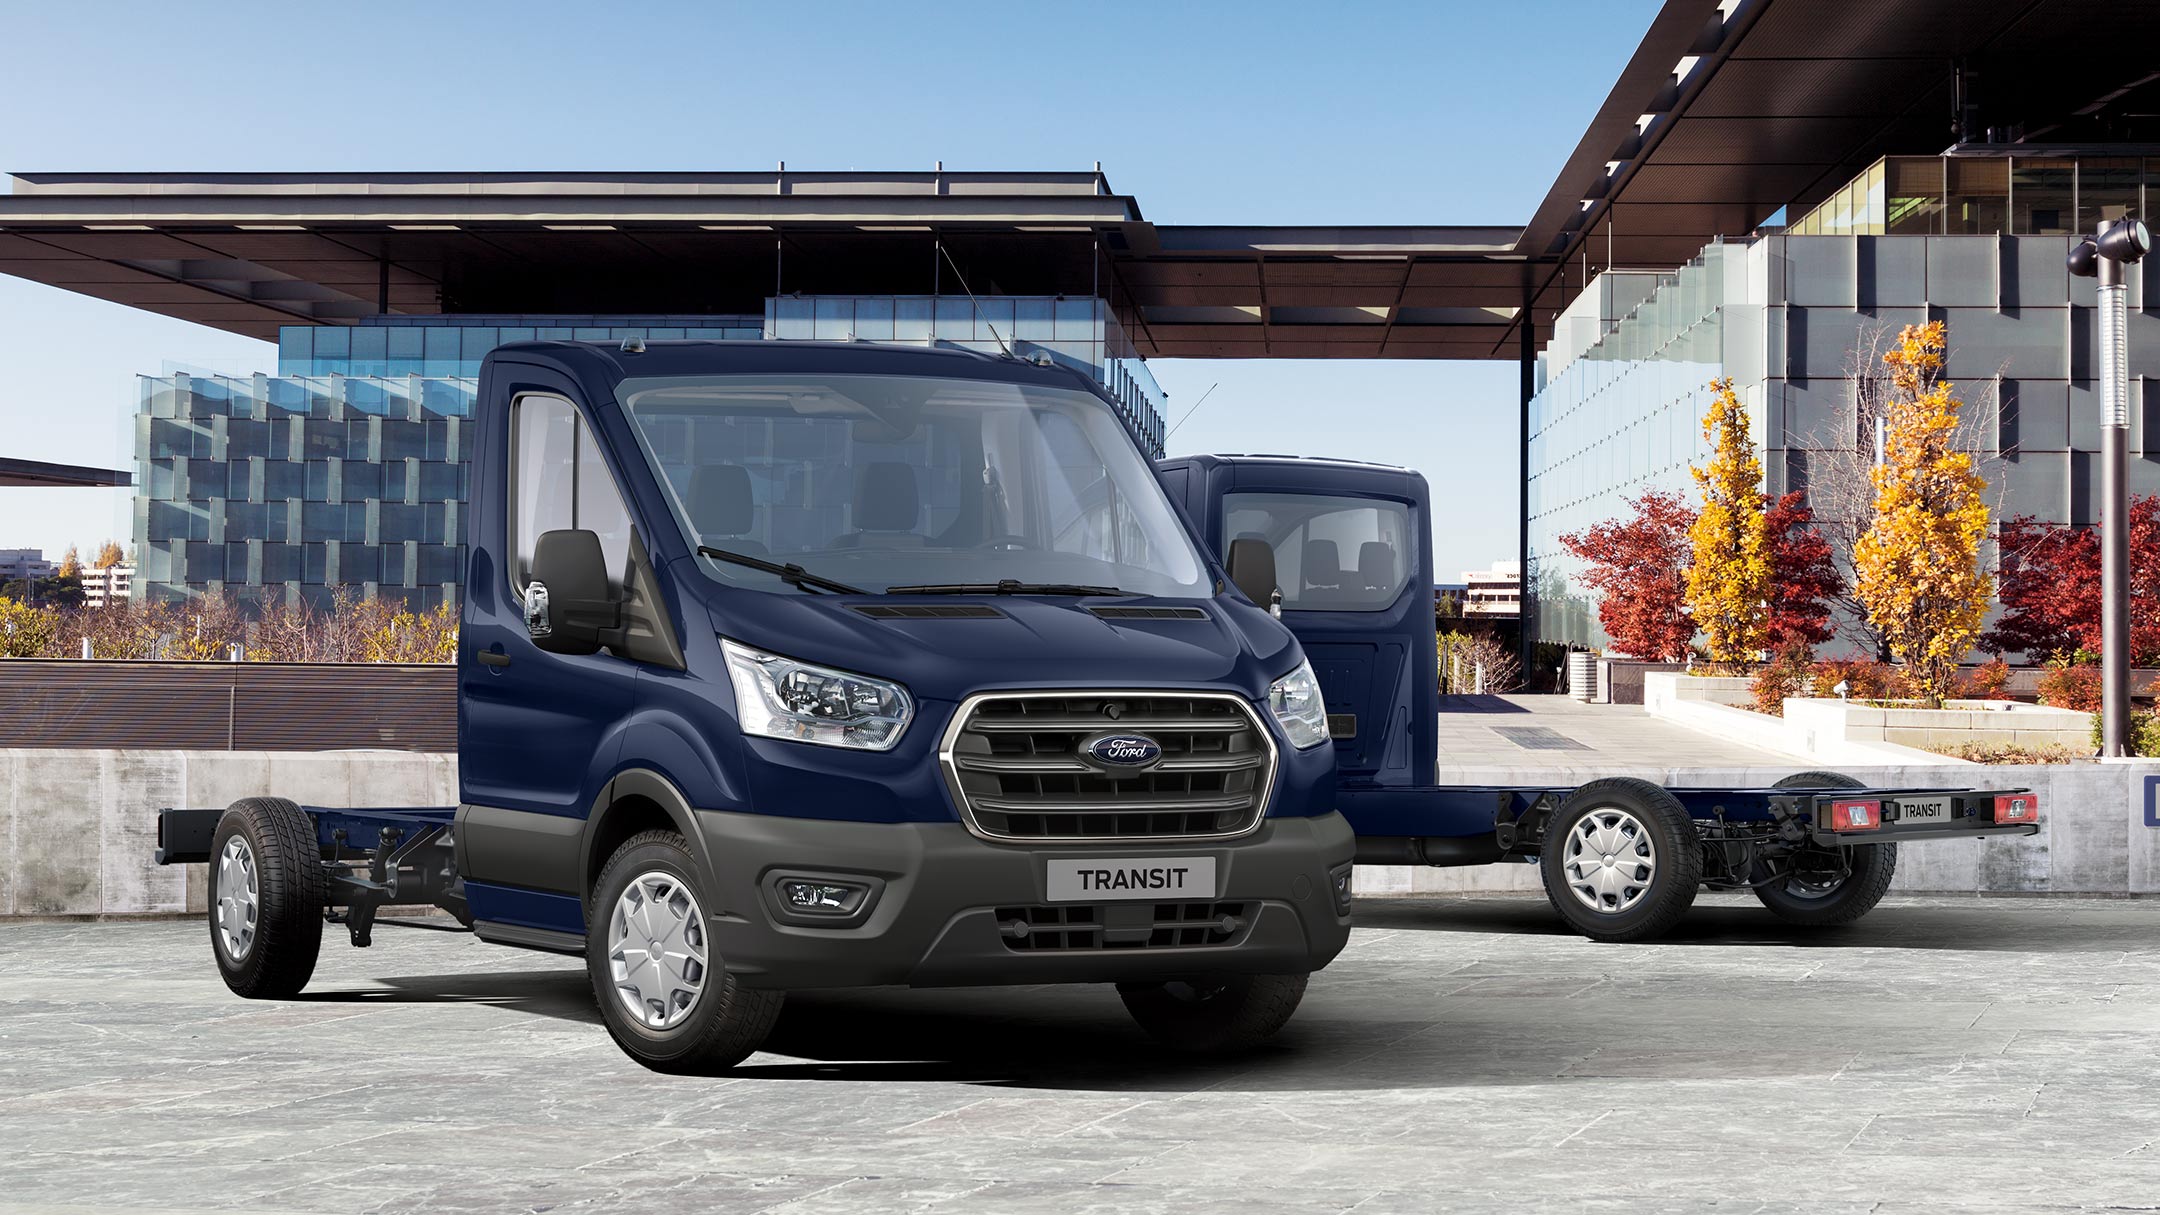 Vista frontal do Ford Transit Chassis Cabina